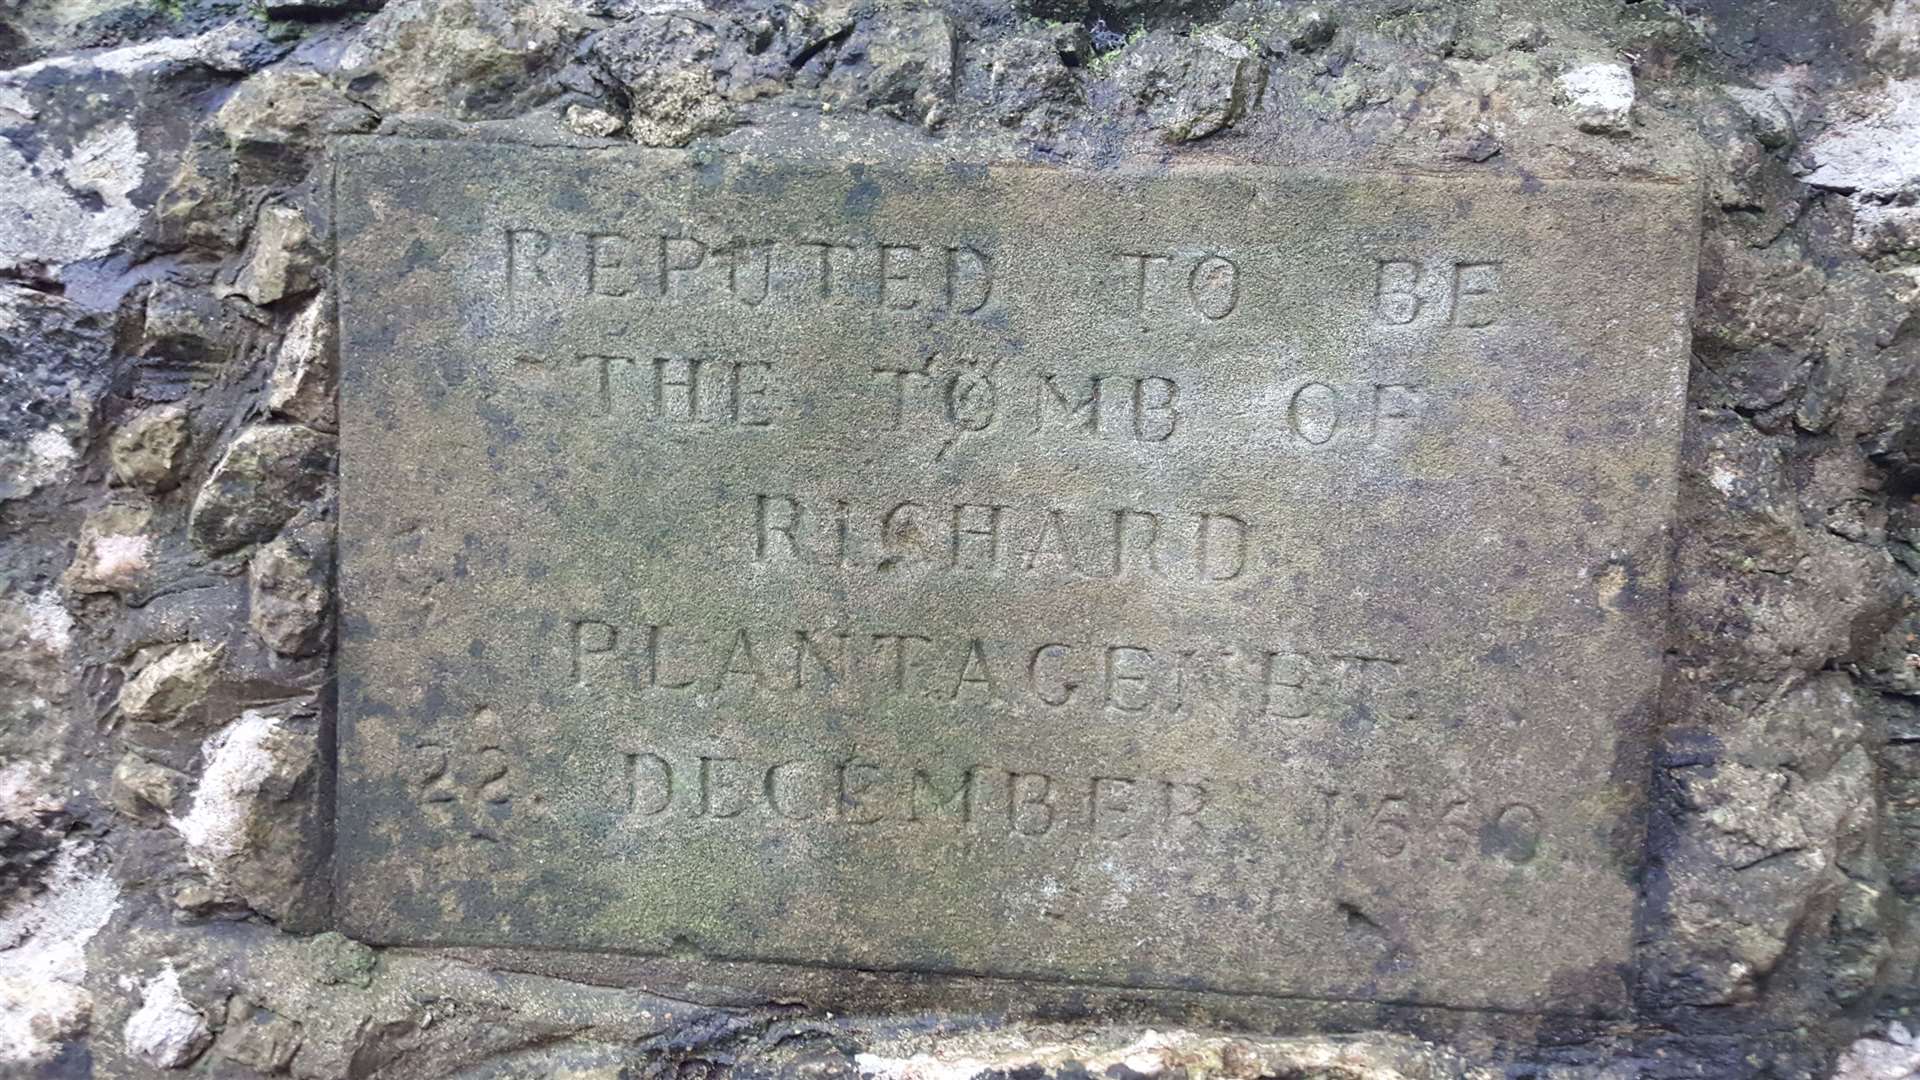 Inscription on the tomb: “Reputed to be the tomb of Richard Plantagenet 22 December 1550"